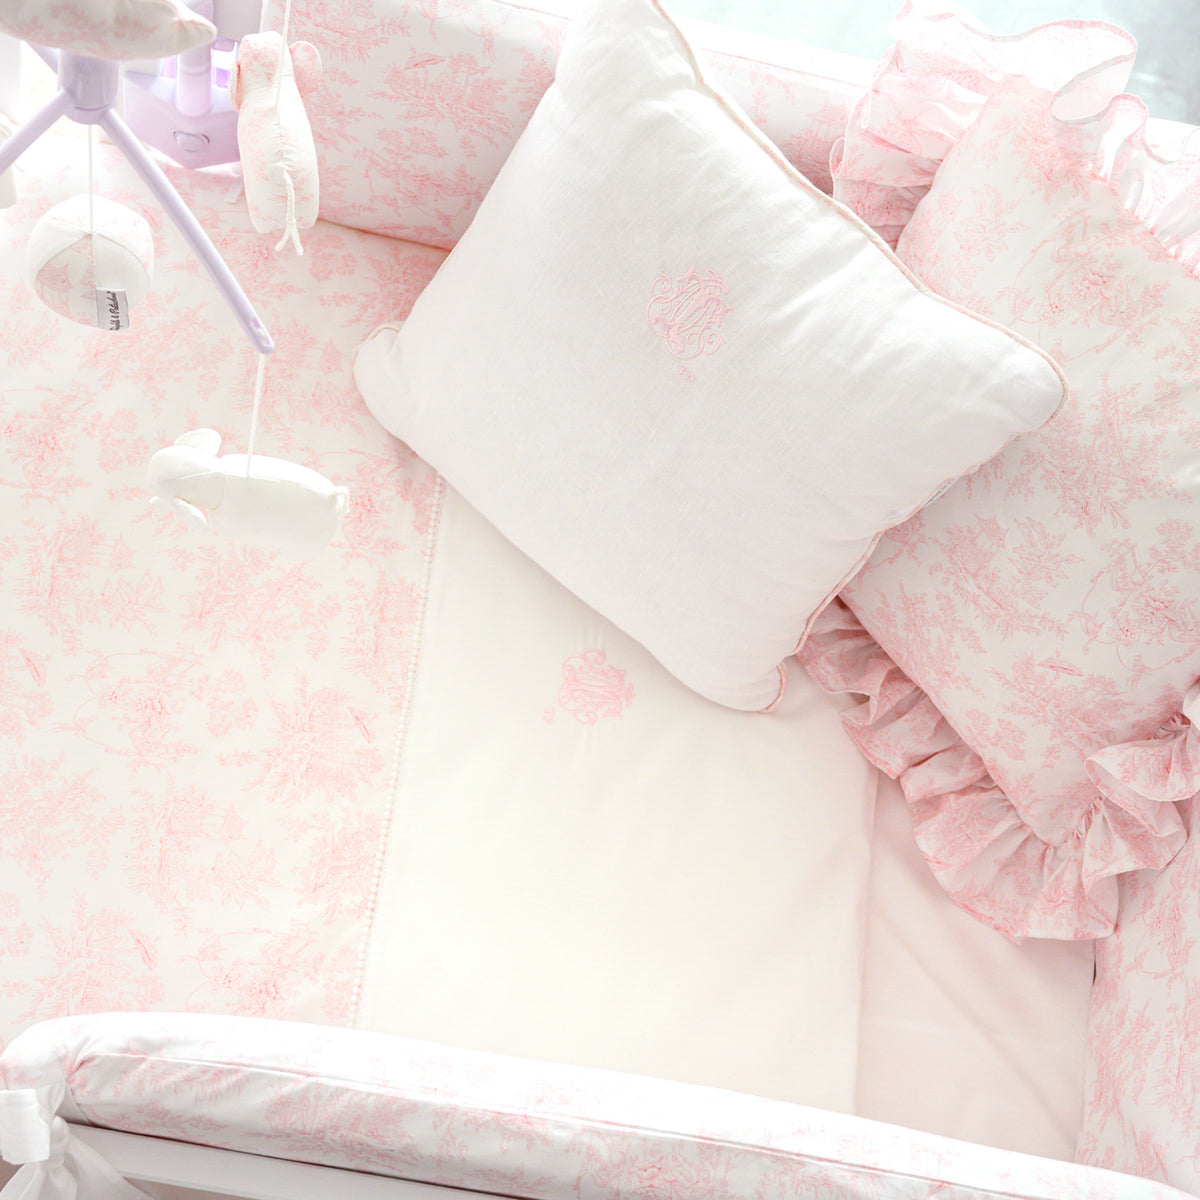 Theophile & Patachou Baby Cot Bed Duvet Cover - Sweet Pink